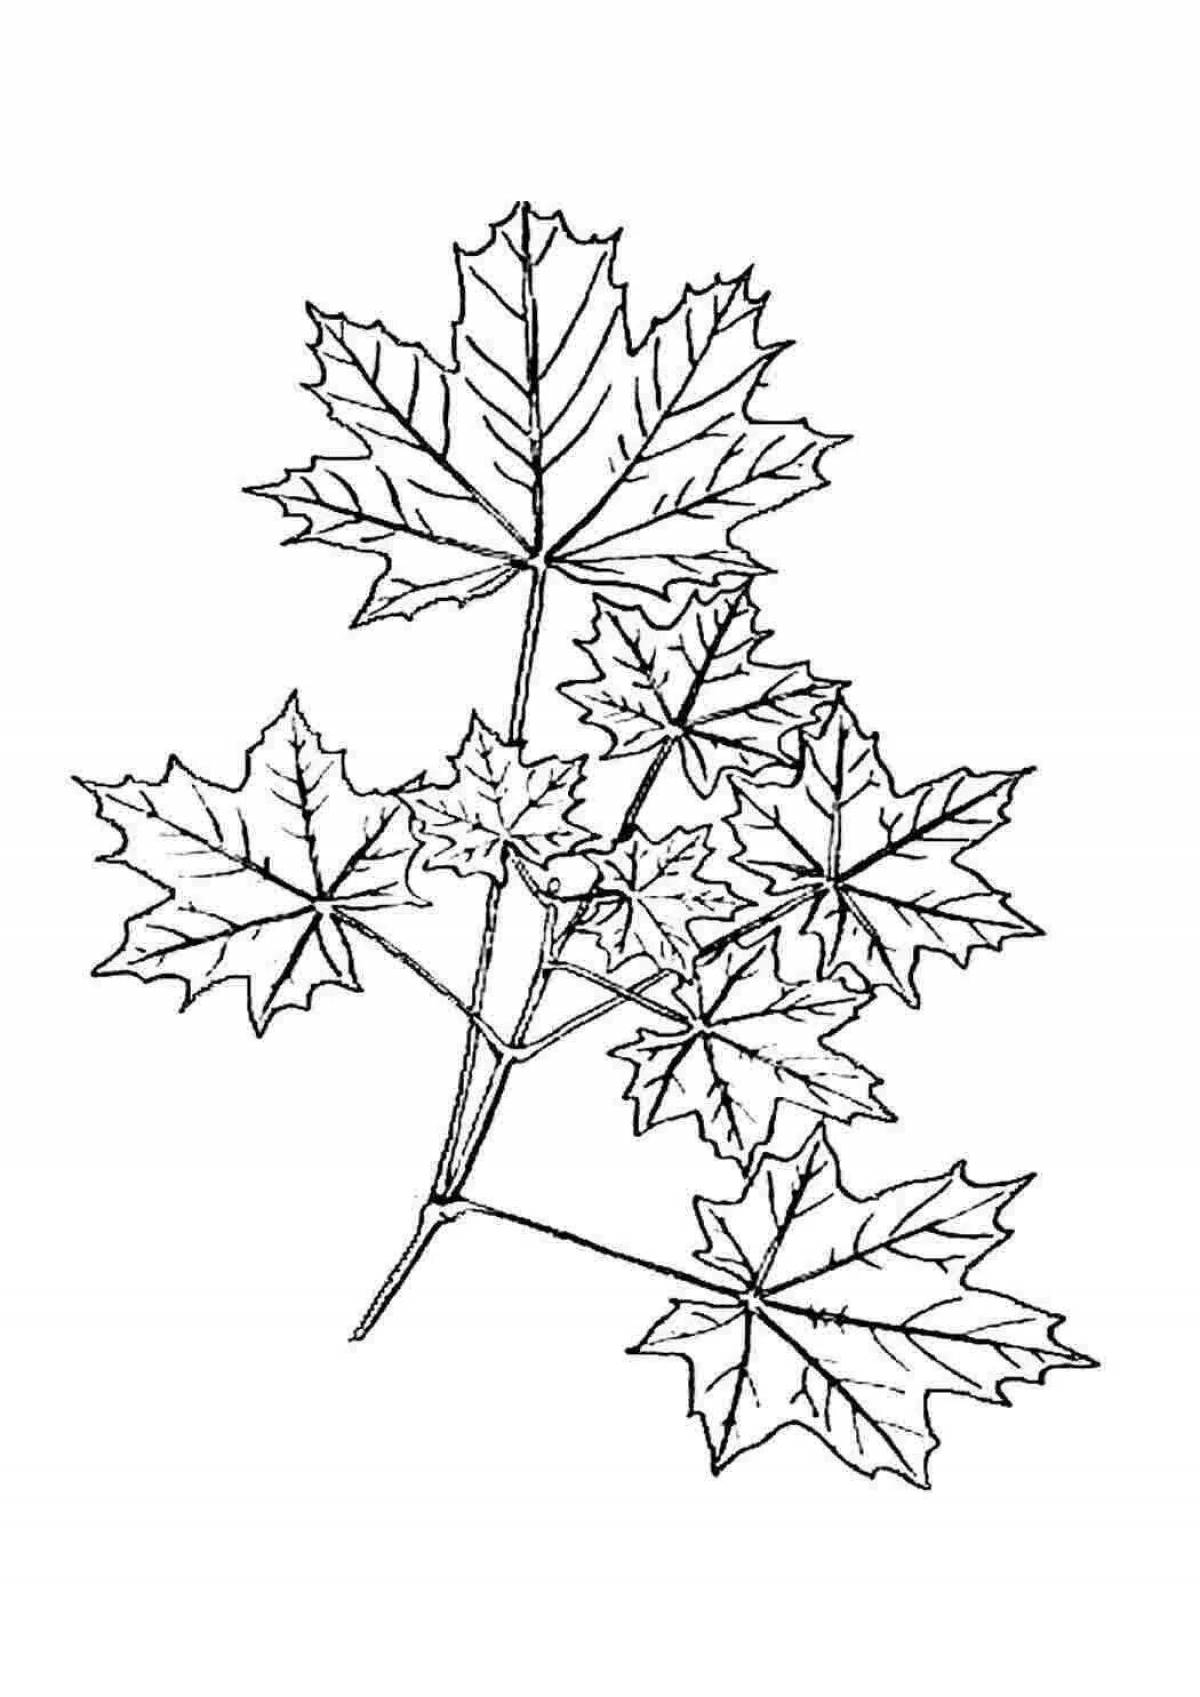 Fun maple coloring book for kids